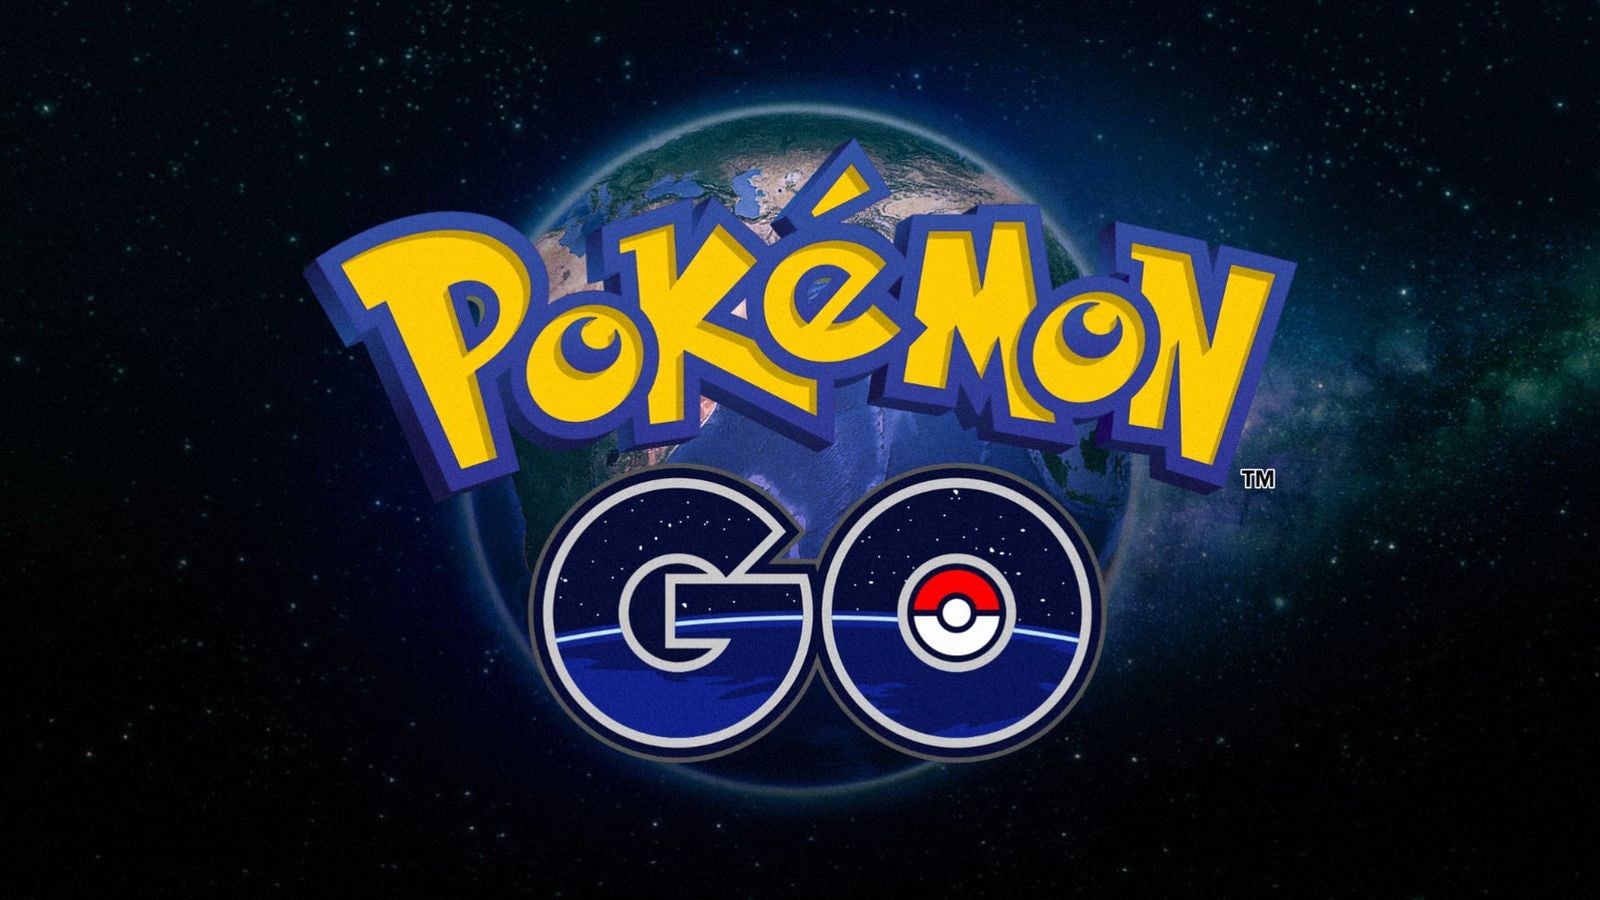 Pokemon GO update expands Nearby feature to “most regions of the world,” adds Sightings